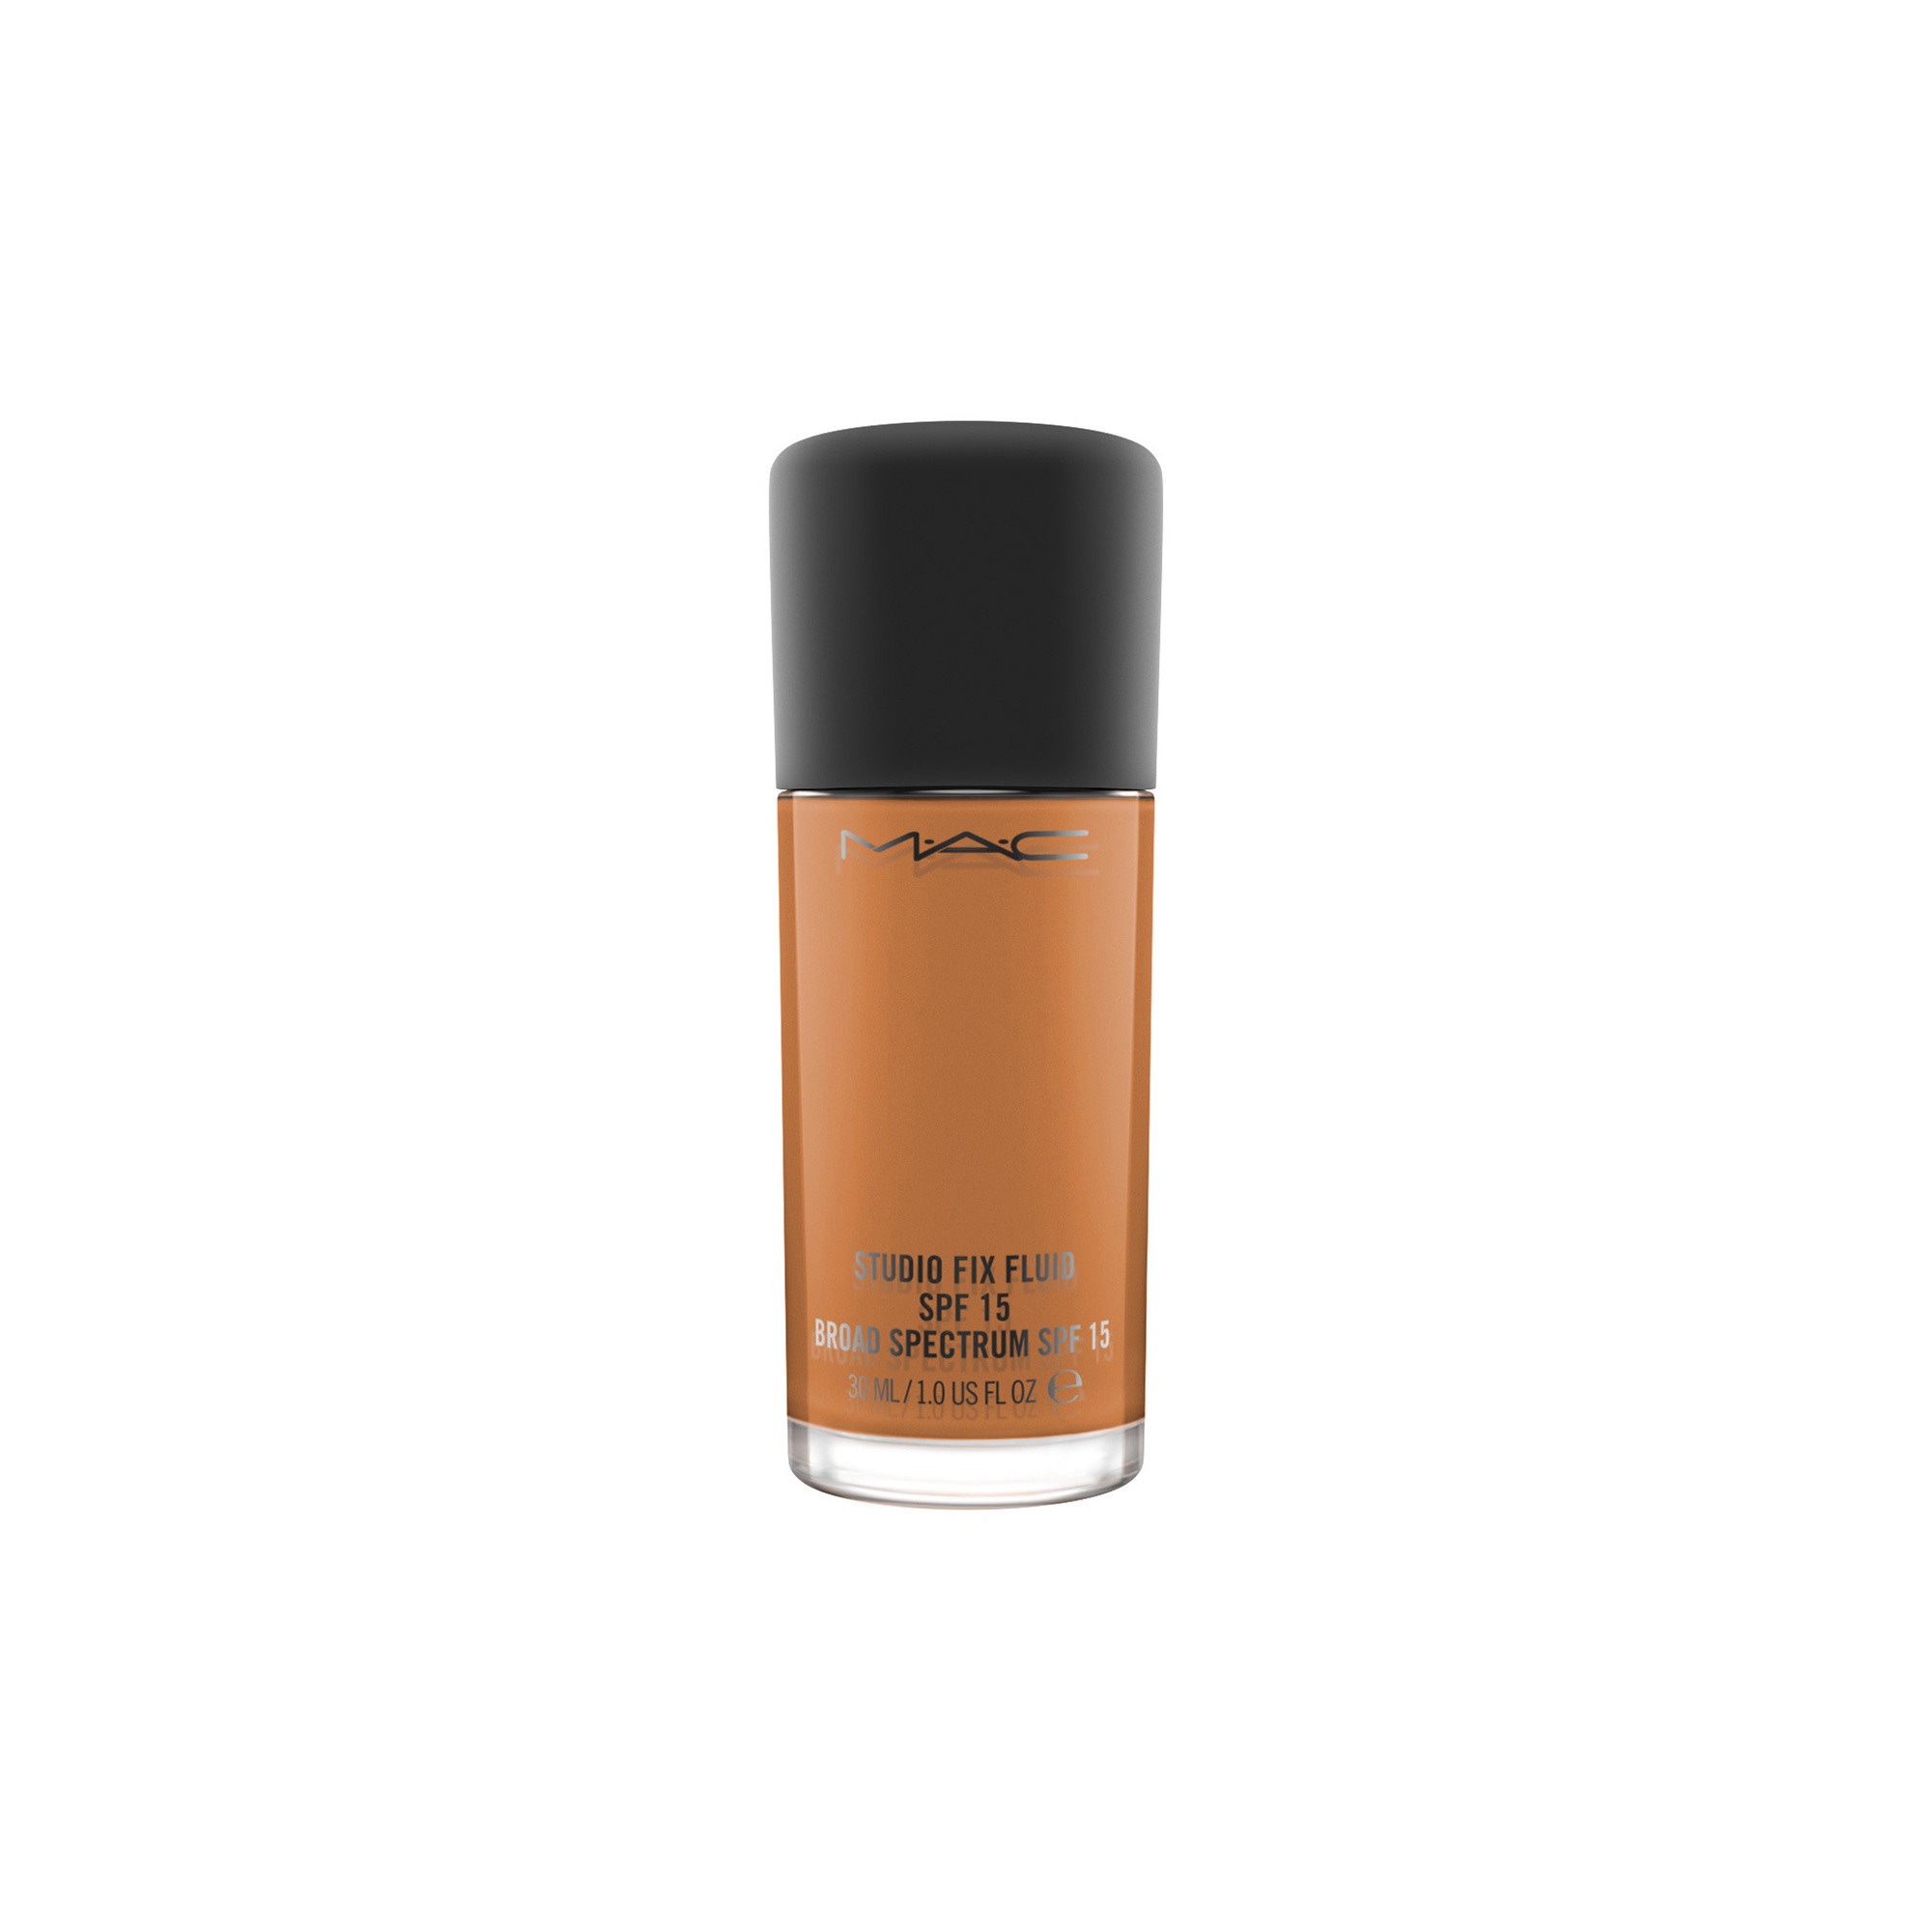 Studio Fix Fluid Foundation Spf15 - NW48, NW48, large image number 0